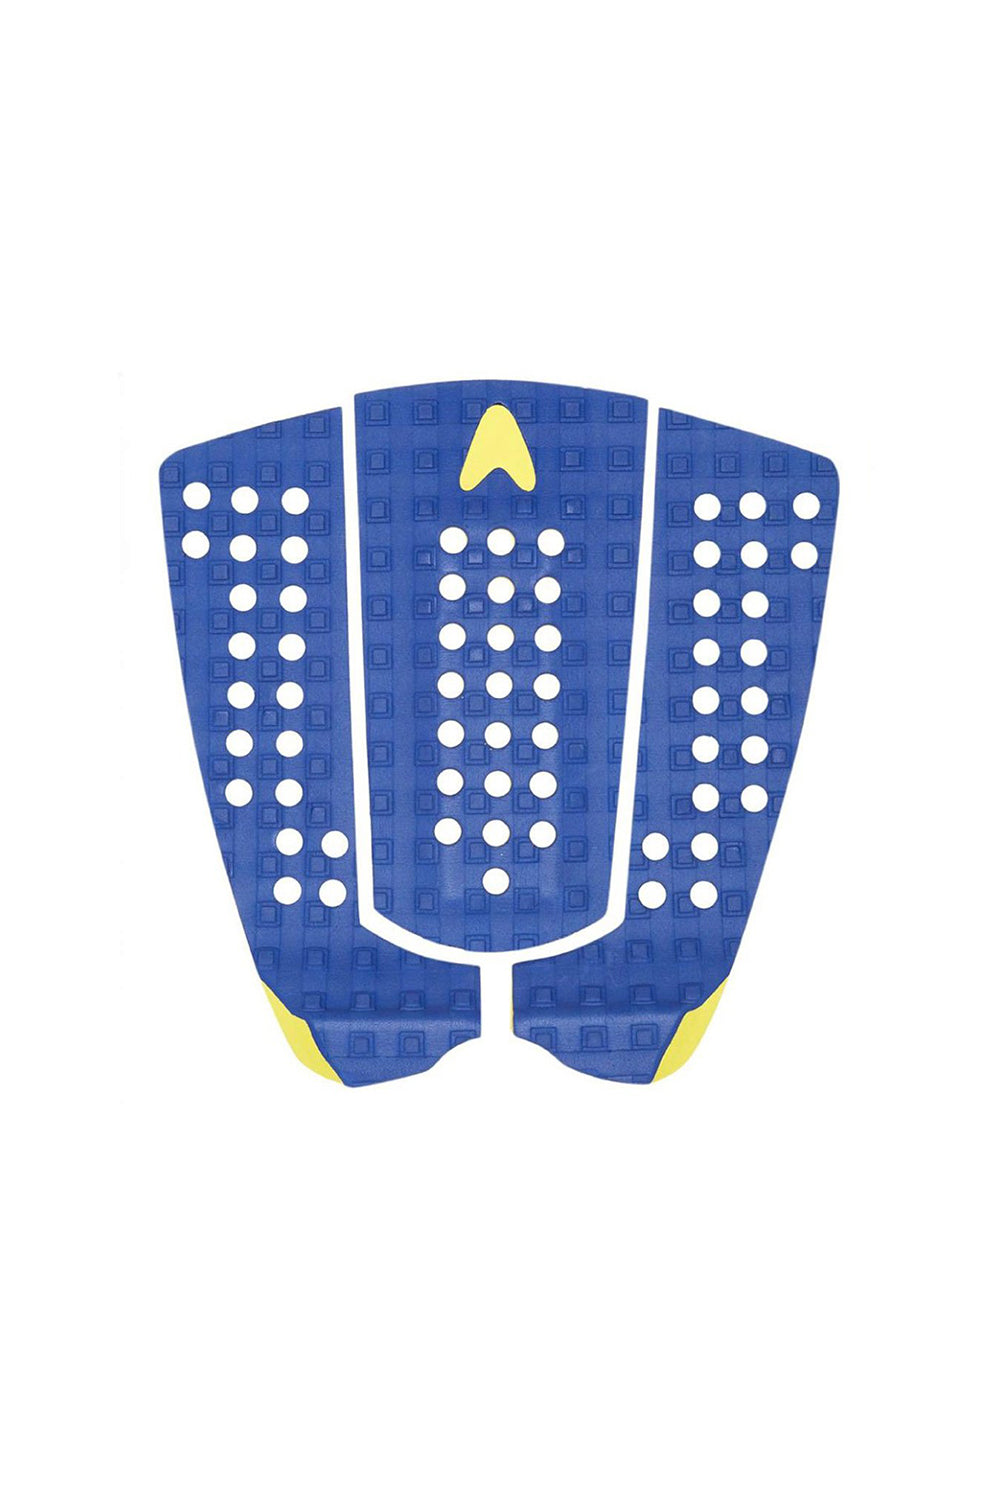 Astro Deck New Nathan - Blue / Yellow Grip Pad Traction